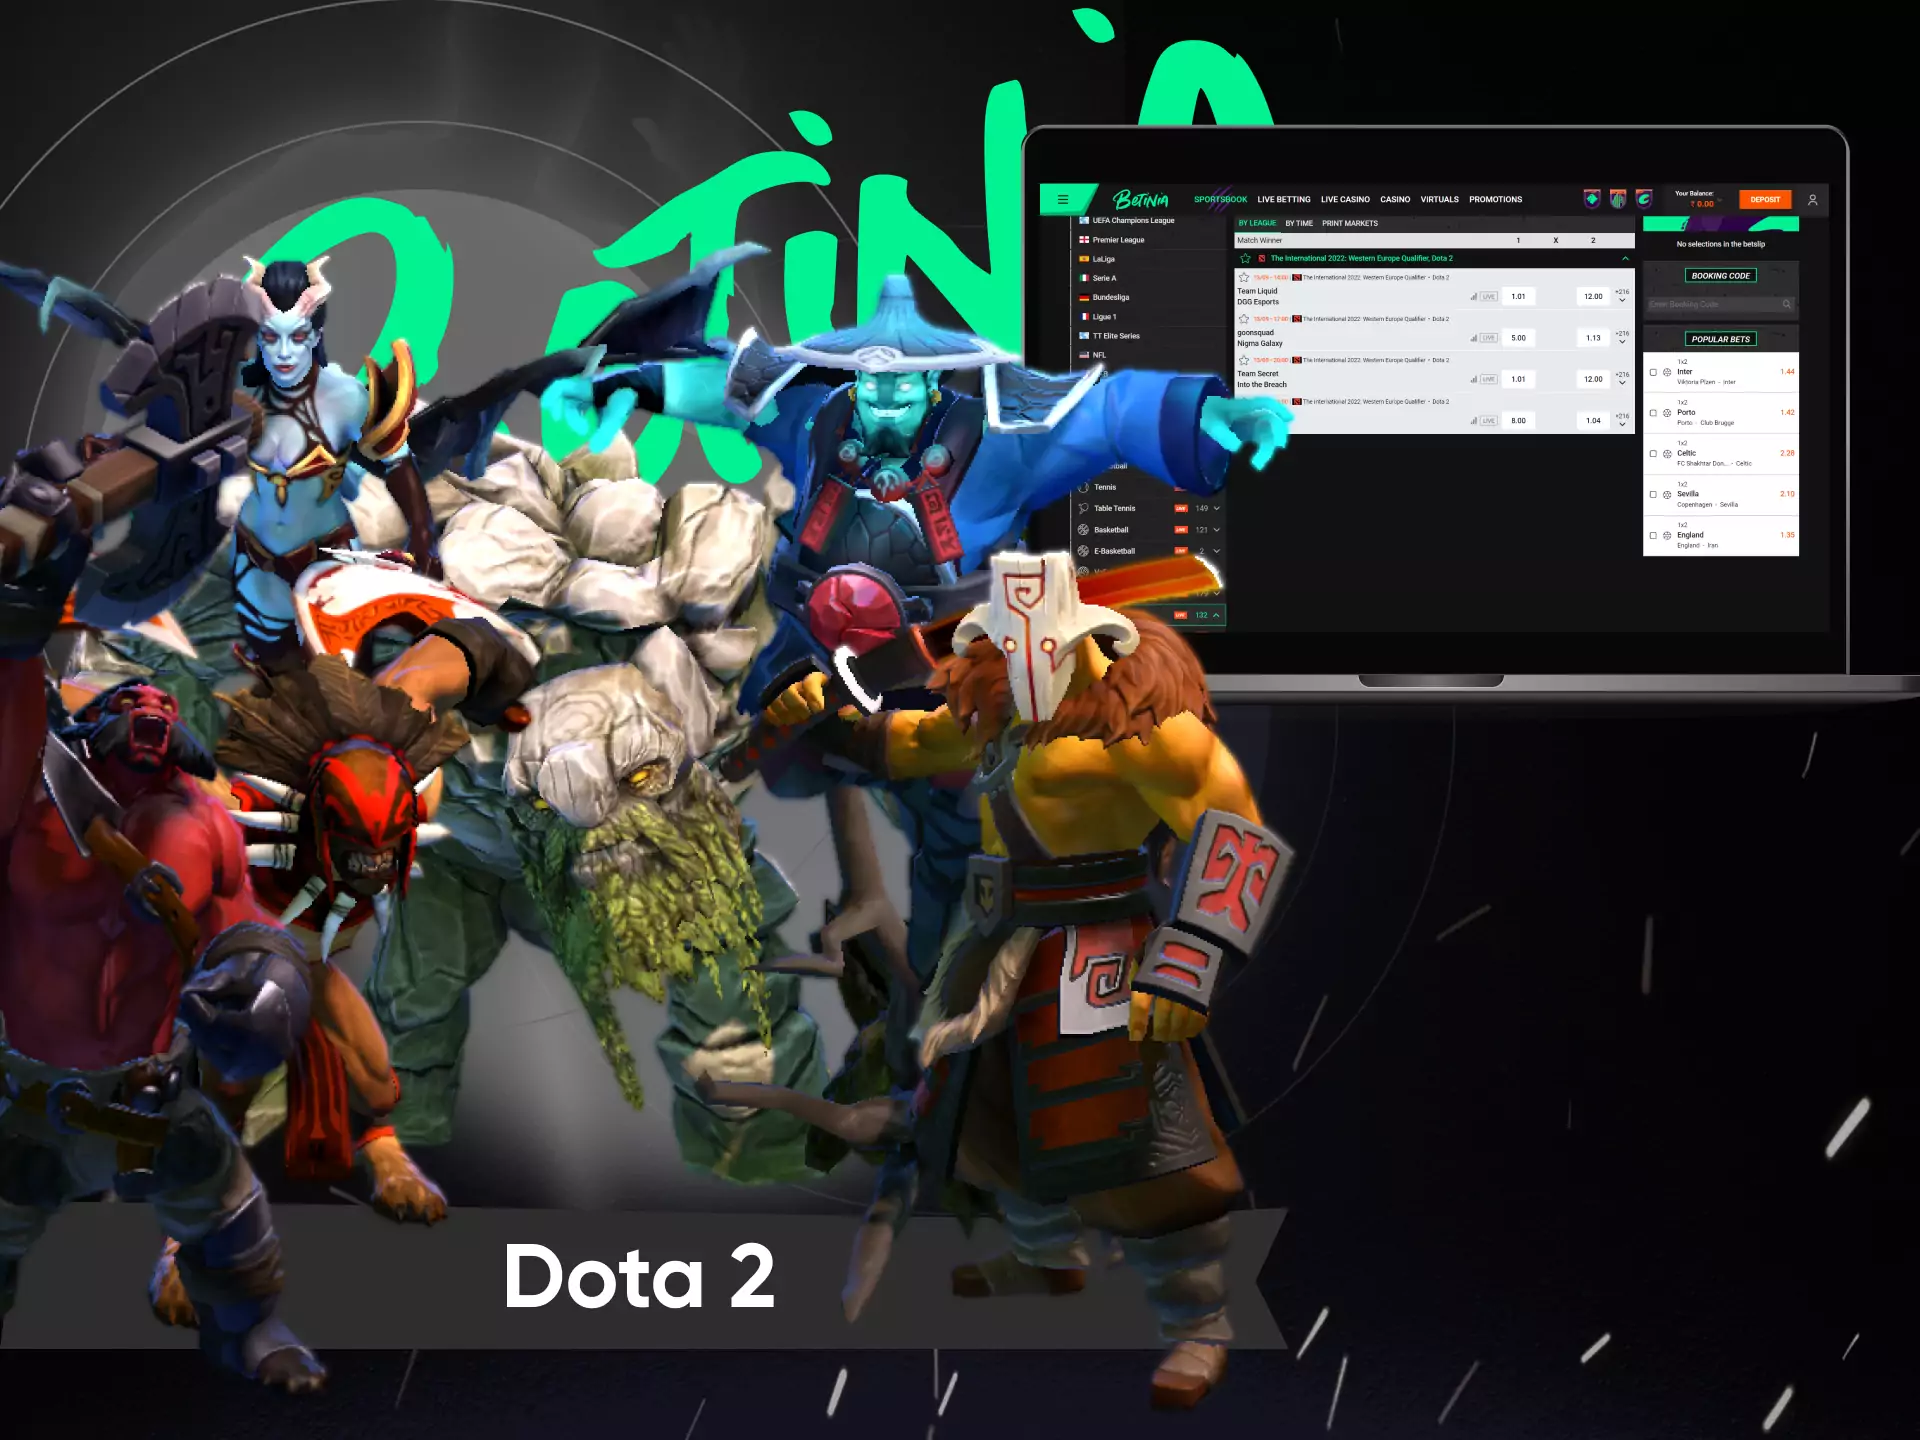 Fans of Dota 2 place bets on events on the Betinia website.